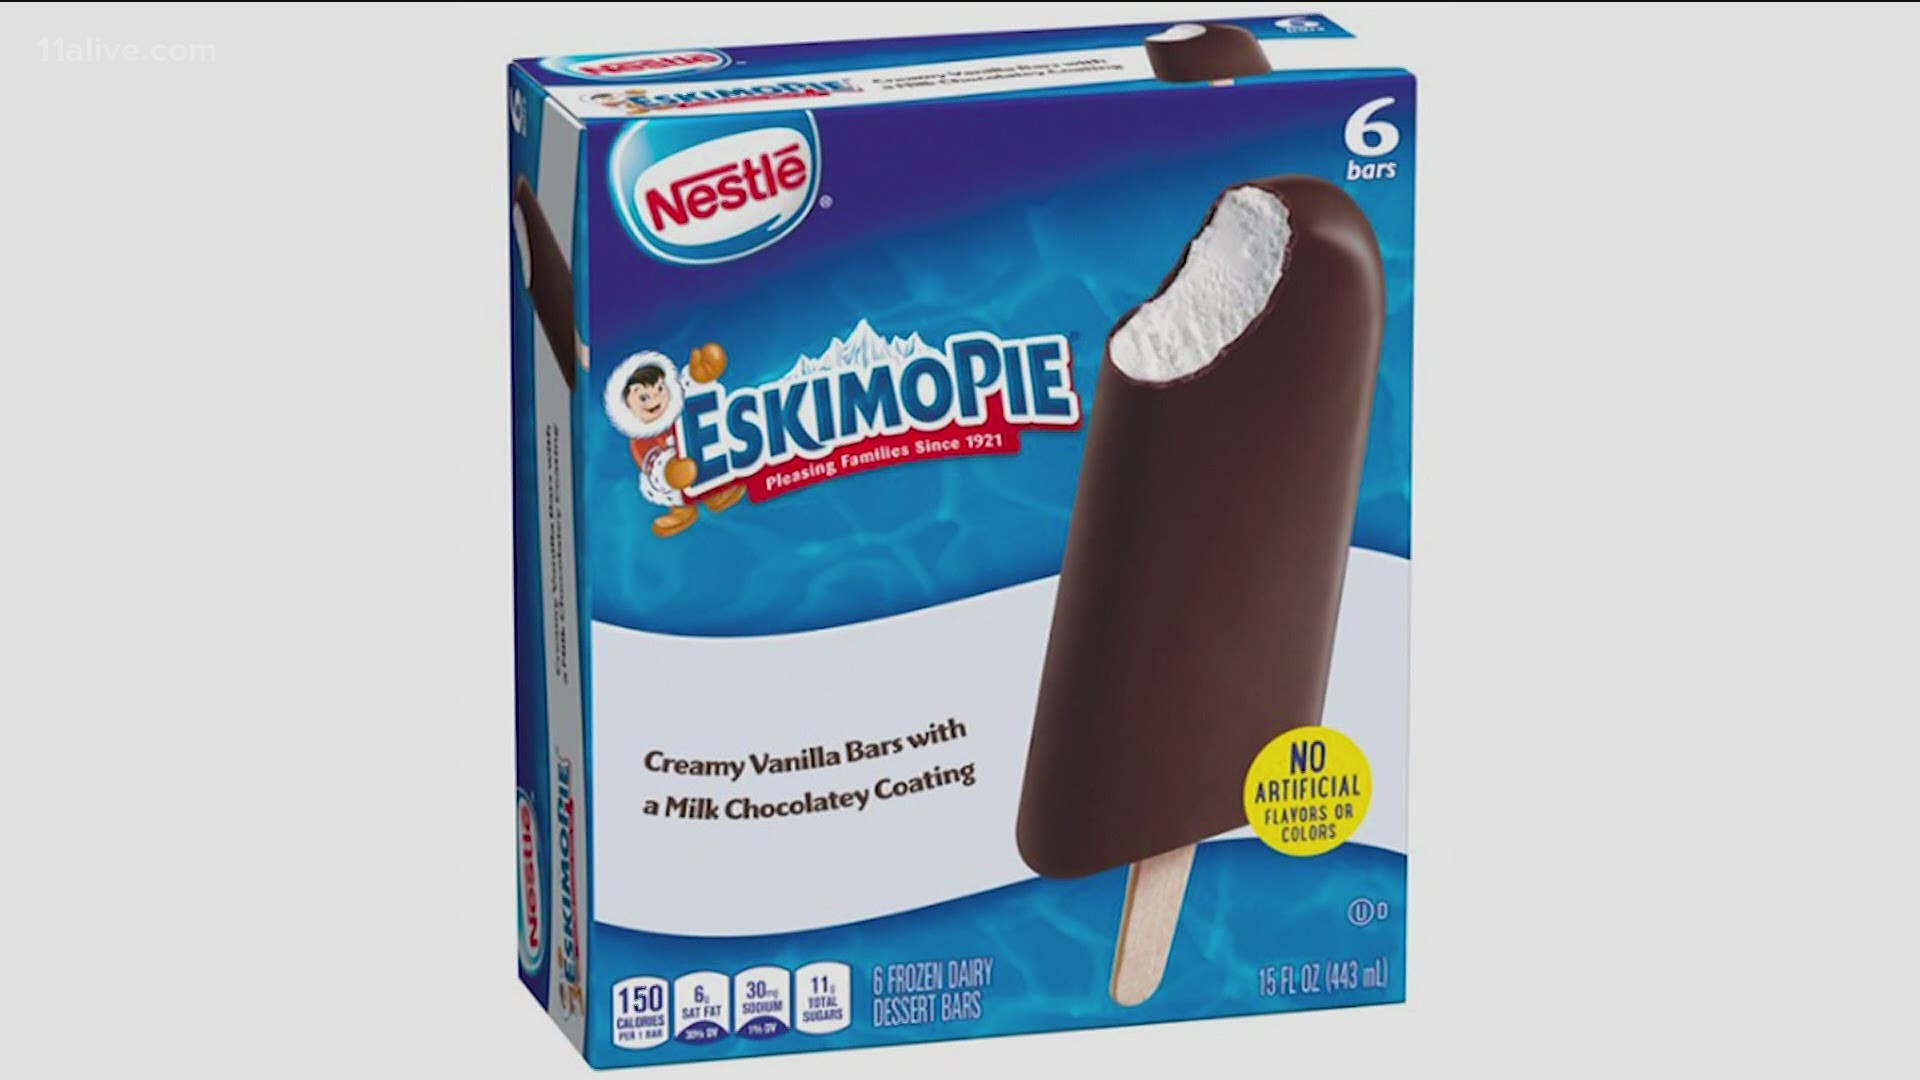 Earlier this year, the company paused production of its Eskimo Pie ice cream bars and acknowledged the name it had been using for decades was "derogatory."